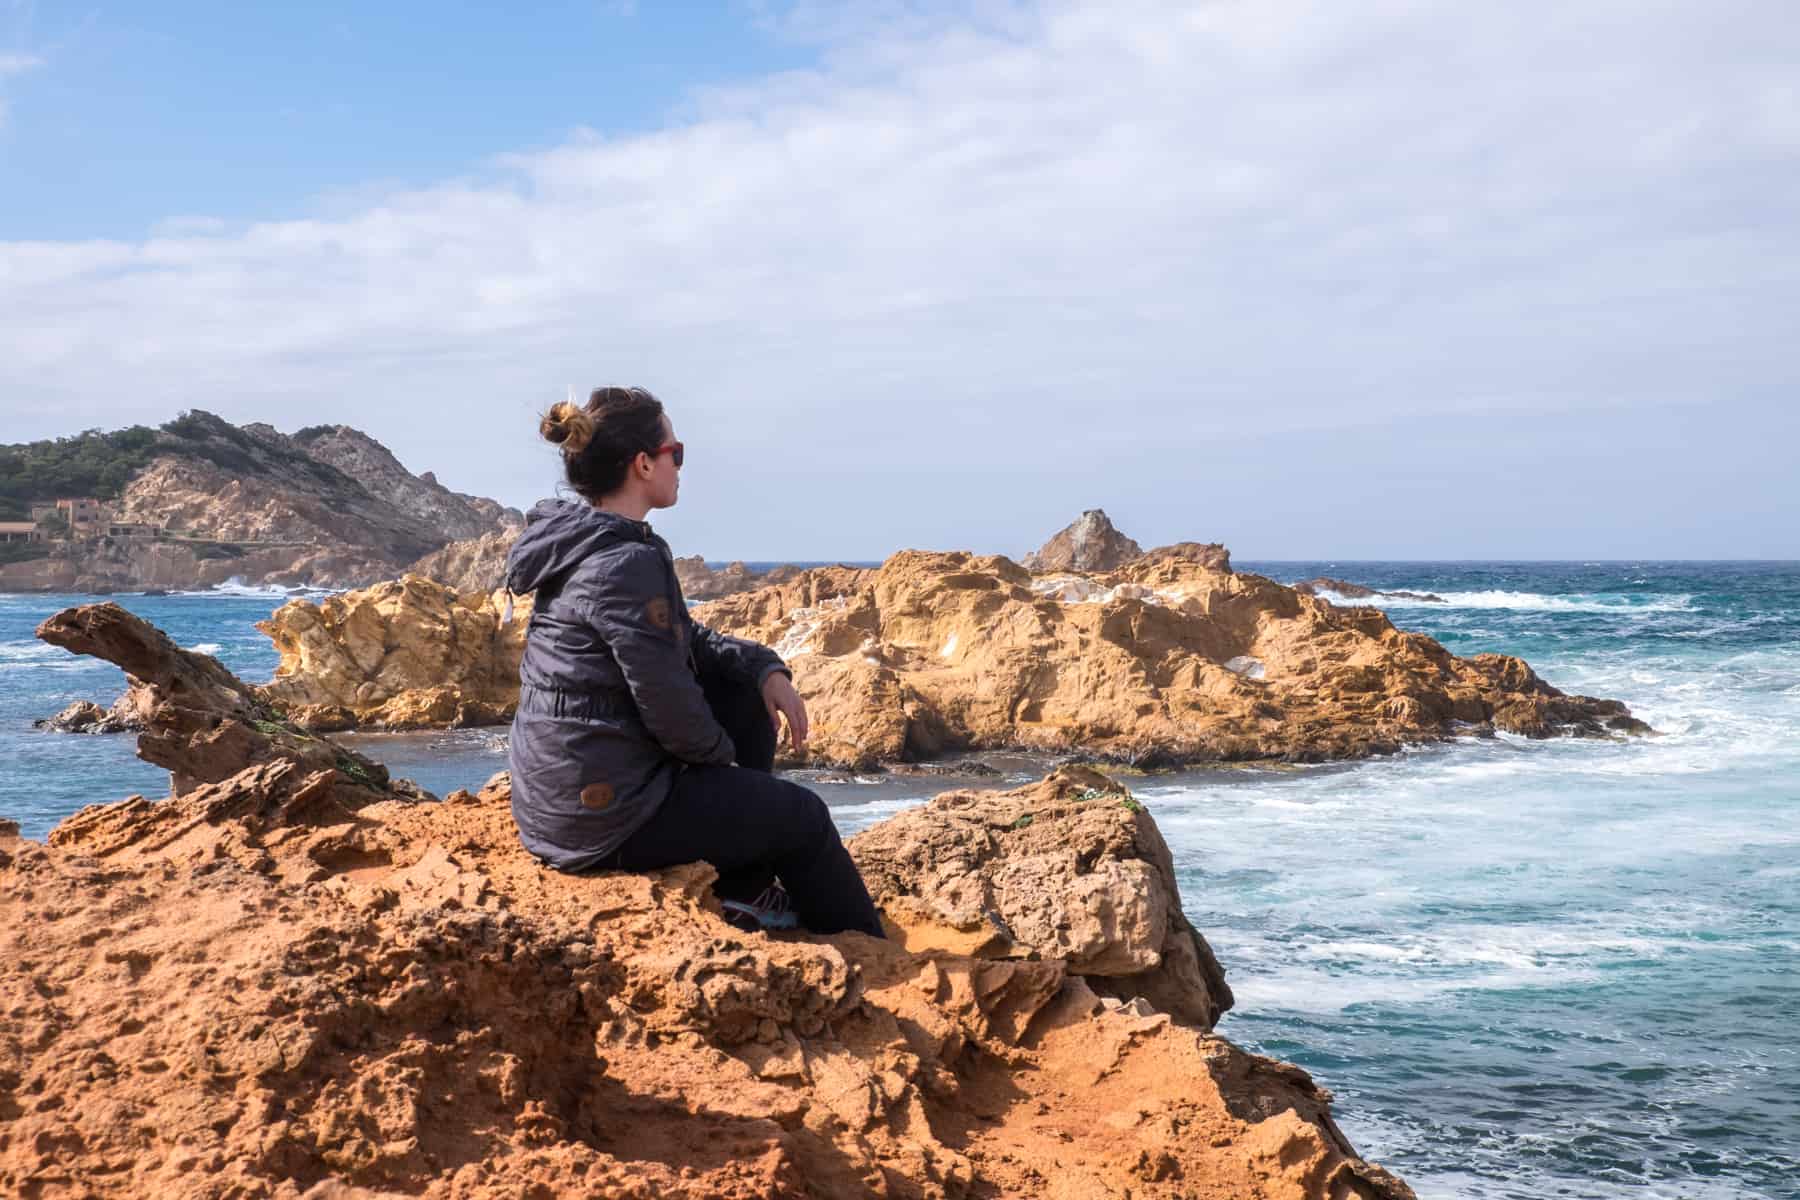 A woman in a navy blue coat sits on a jagged golden rock on the coastline of Menorca, Spain looking out to the ocean.